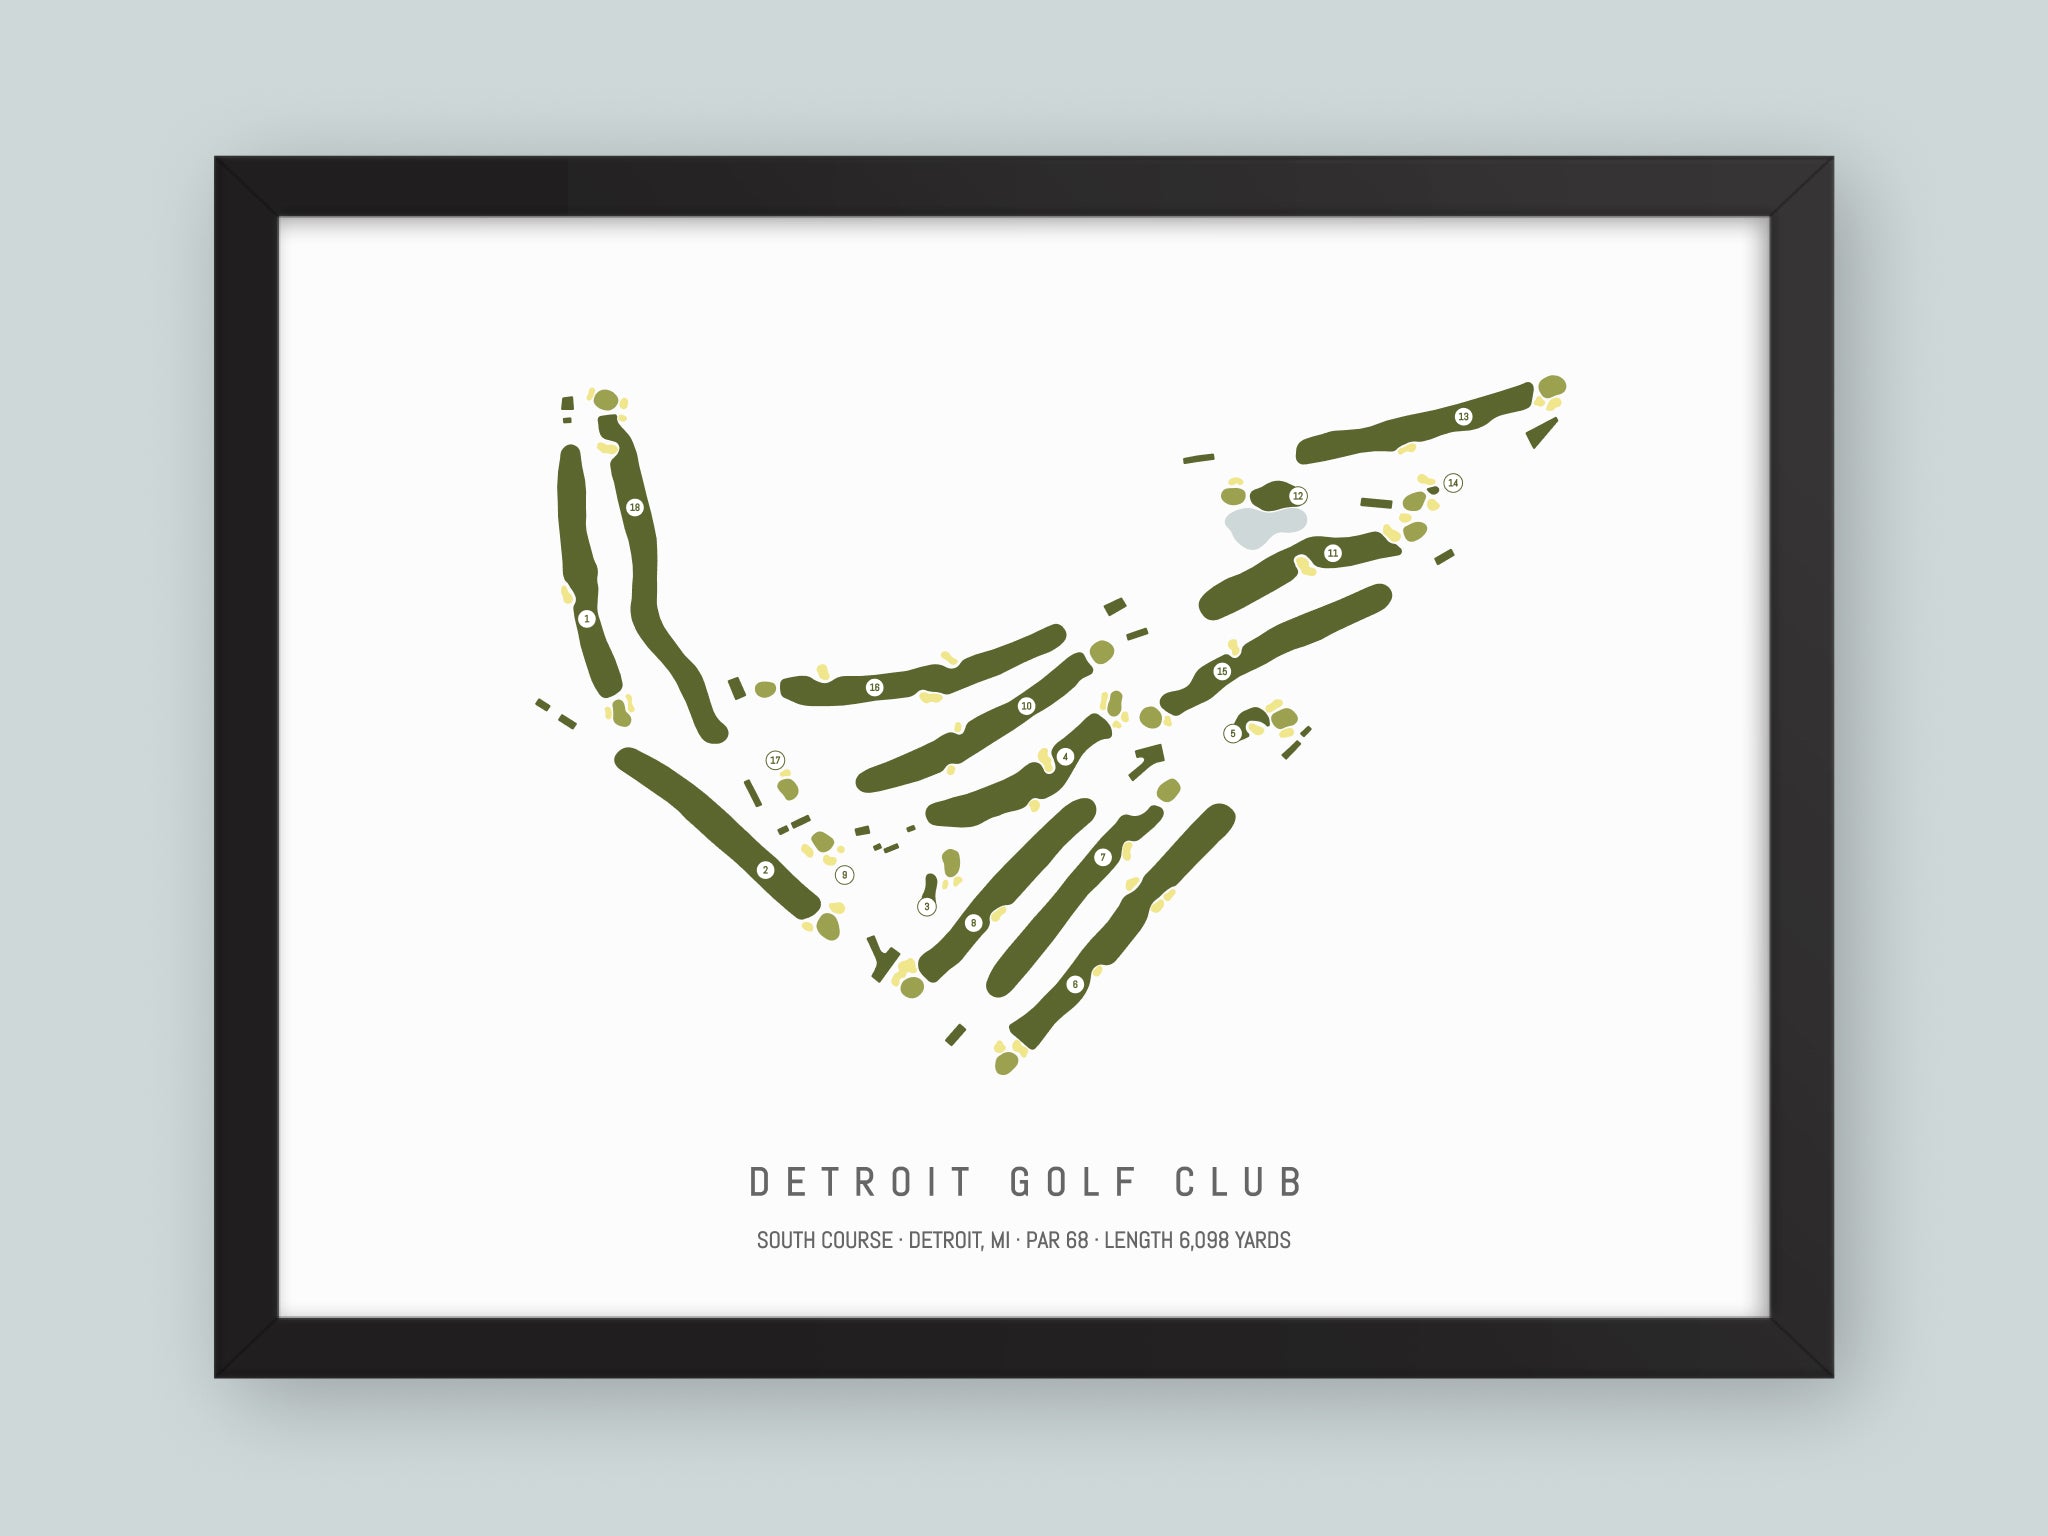 Detroit-Golf-Club-South-Course-MI--Black-Frame-24x18-With-Hole-Numbers